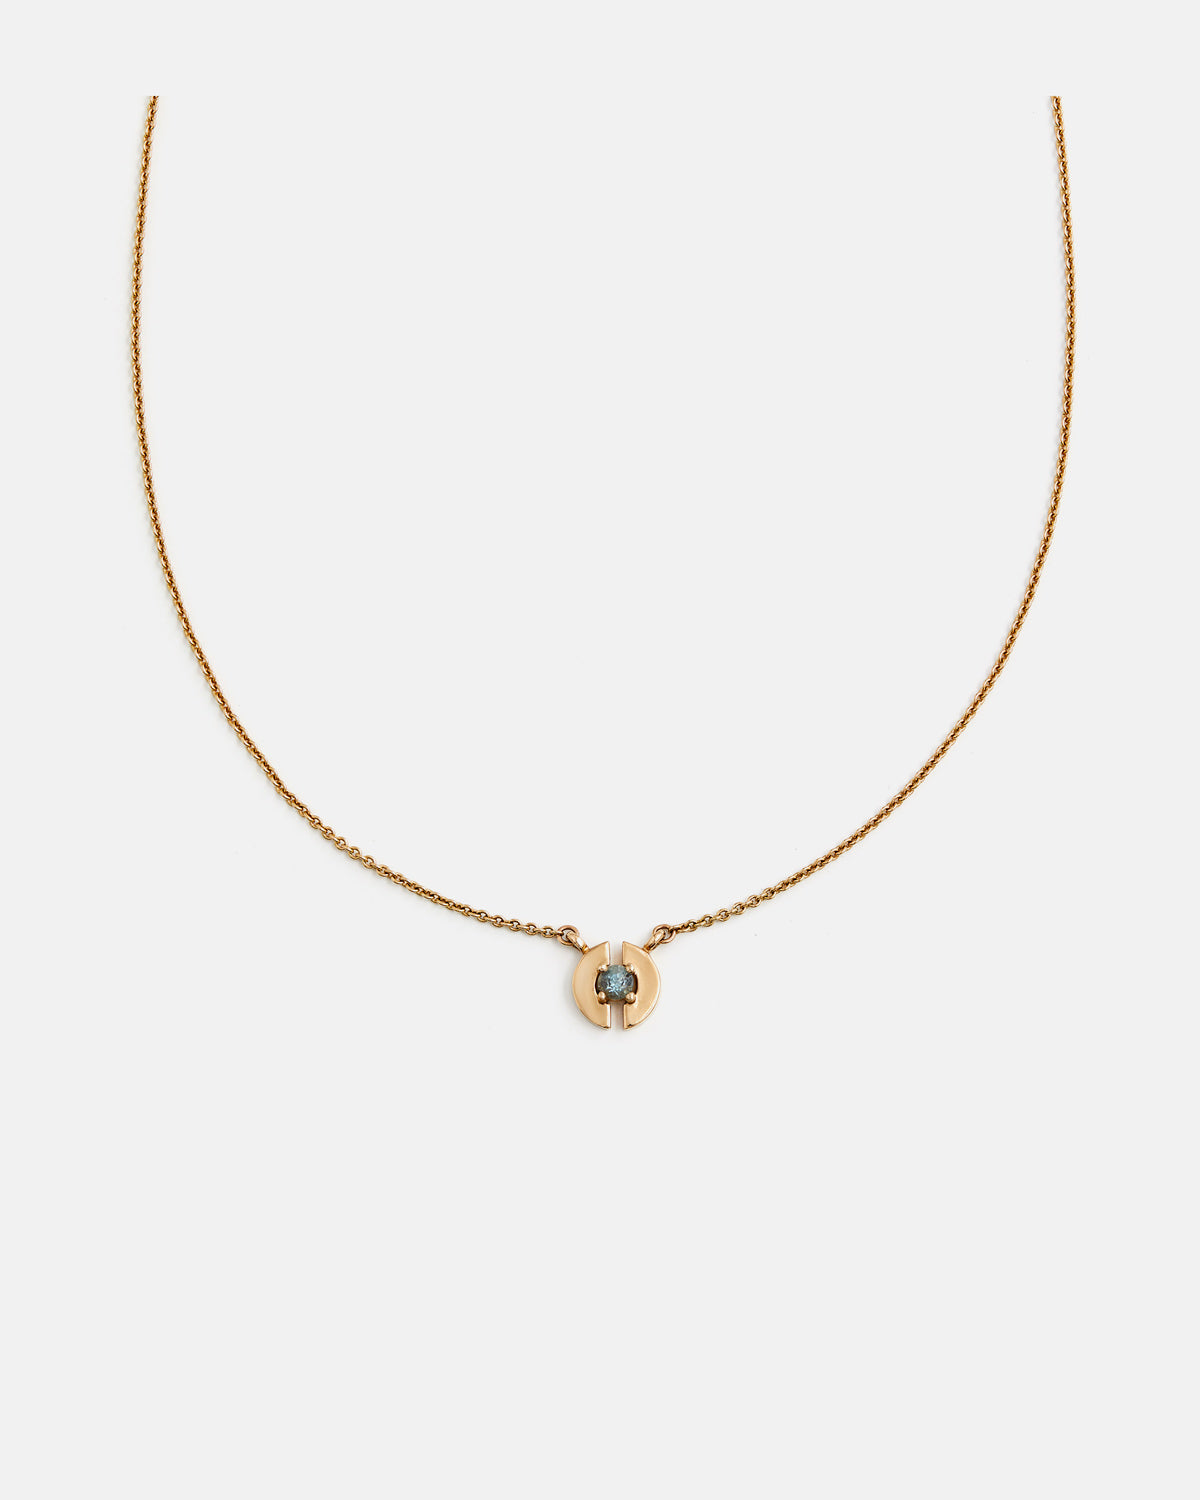 Stein Necklace in 14k Yellow Gold with Aquamarine